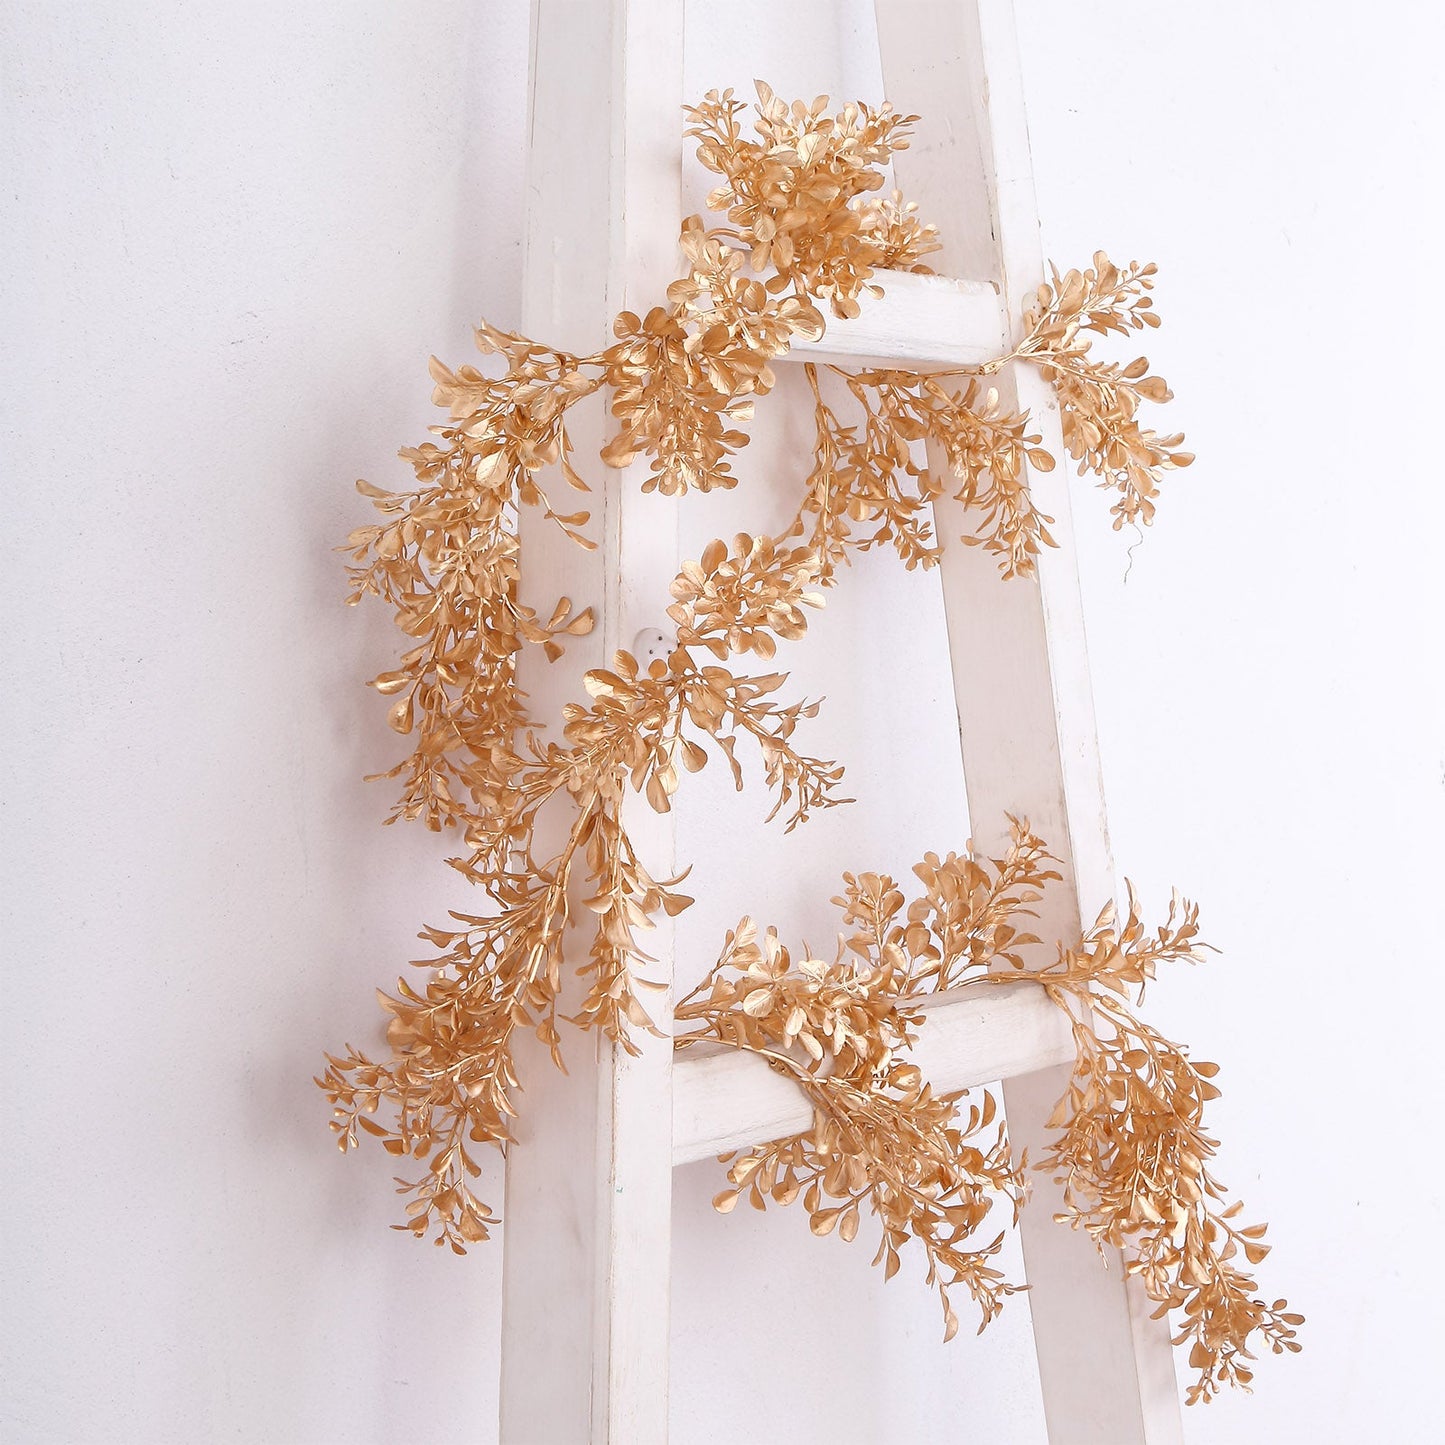 Metallic Gold Artificial Boxwood Leaf Table Garland, Faux Decorative Hanging Vine 6ft